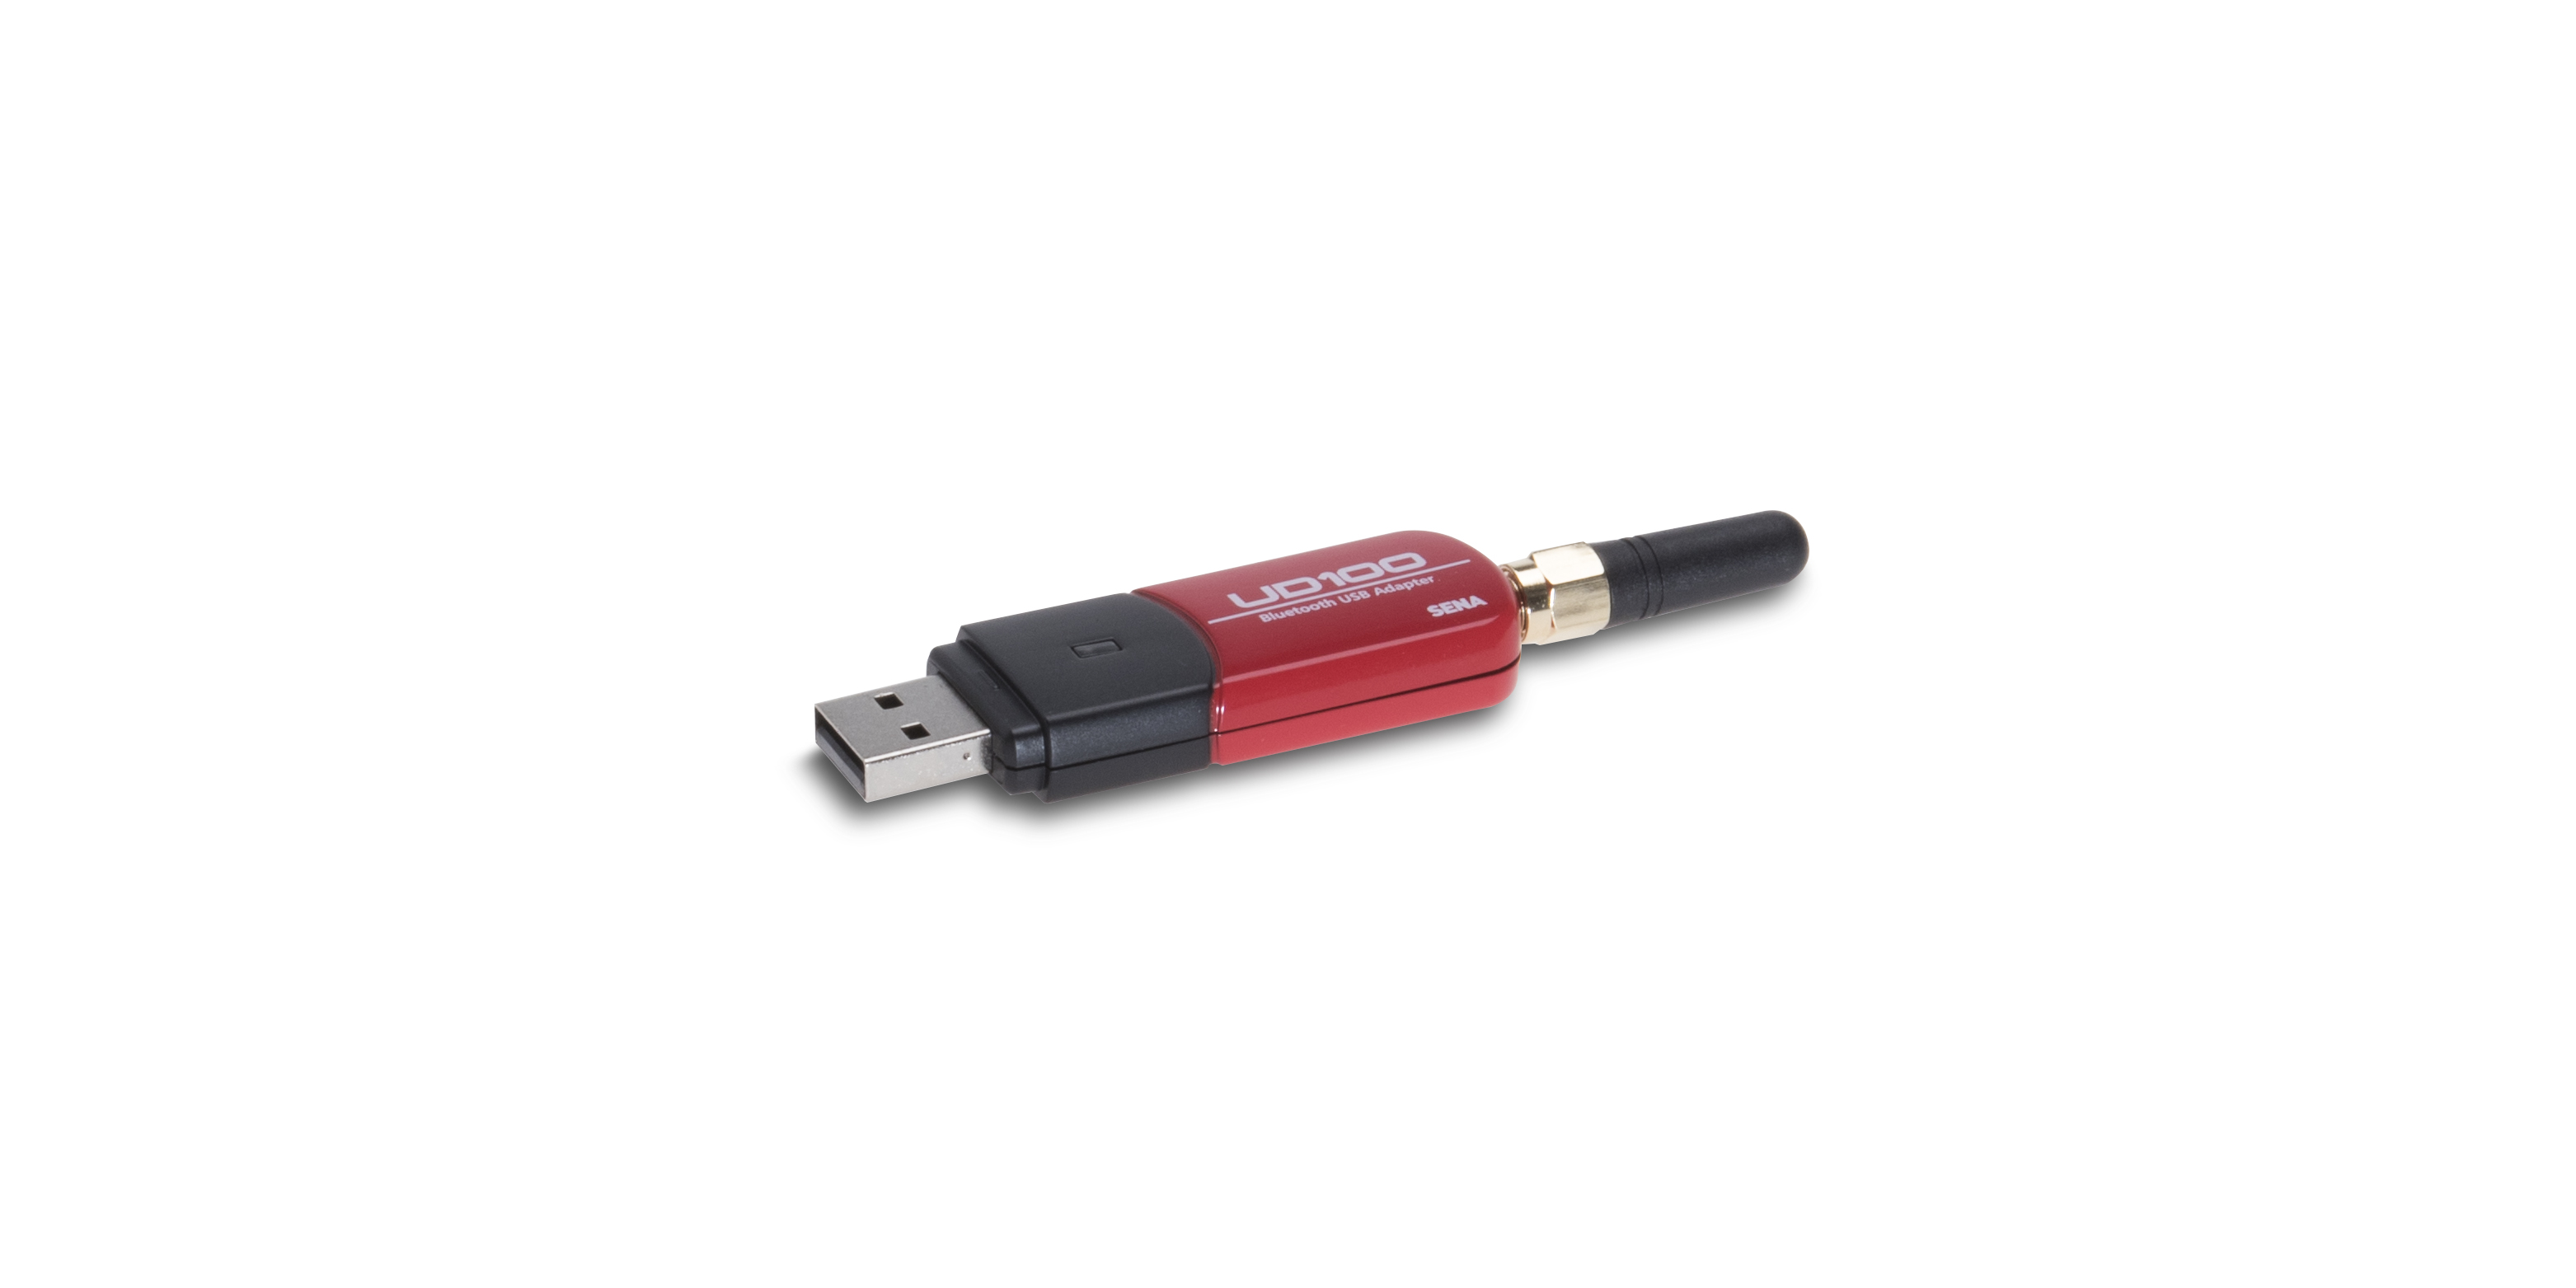 Parani-UD100 Bluetooth 4.0 Class1 USB Adapter, Exchangeable Antenna